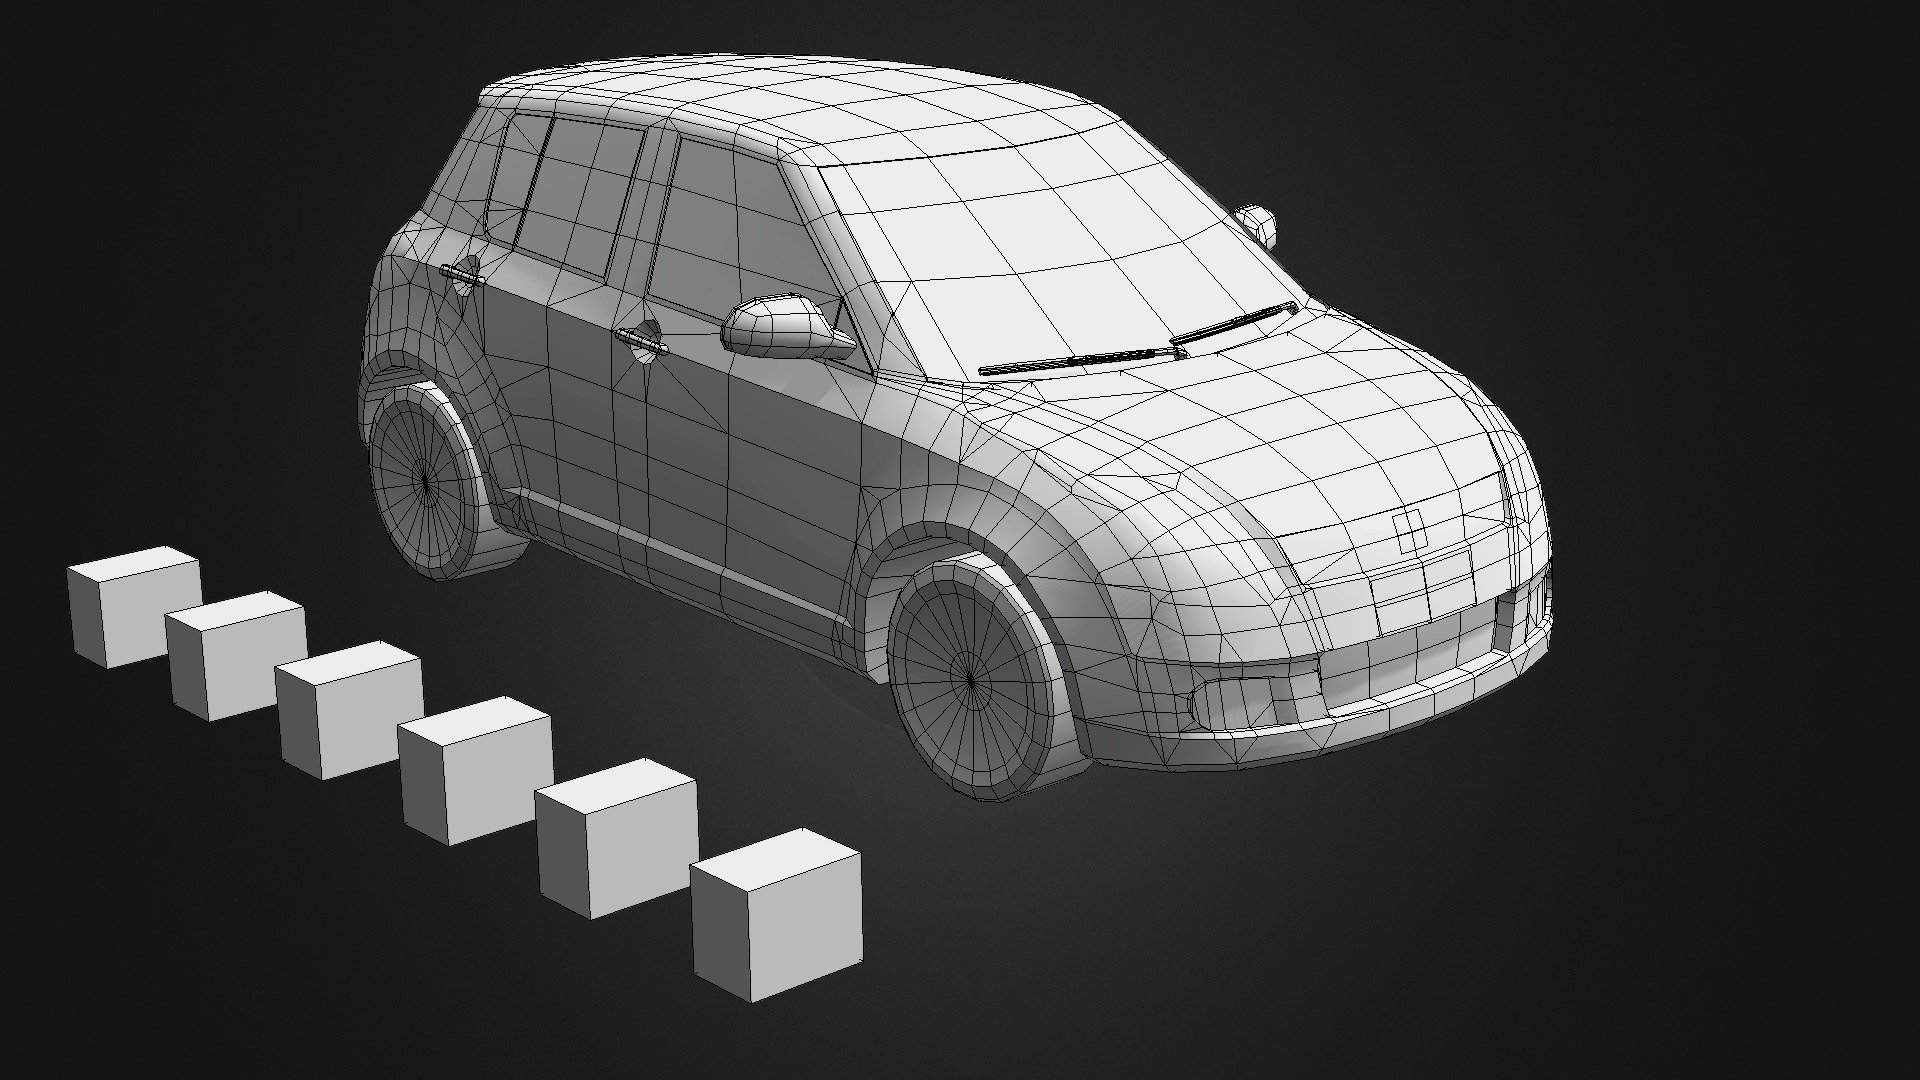 Maruti Swift Optimized Car is the optimized model with High-Resolution texture to give realistic and faster rendering. This product comes with superb quality and Perfect model for game and visualization. Give superb look and feel in gaming engine. Neat and clean polygons and every edge have to mean.

The model has an optimized low poly mesh with the greatest possible number of simplifications that do not affect photo-realism but can help to simplify it, thus lightening your scene and allowing for using this model in the real-time 3d applications 3d model